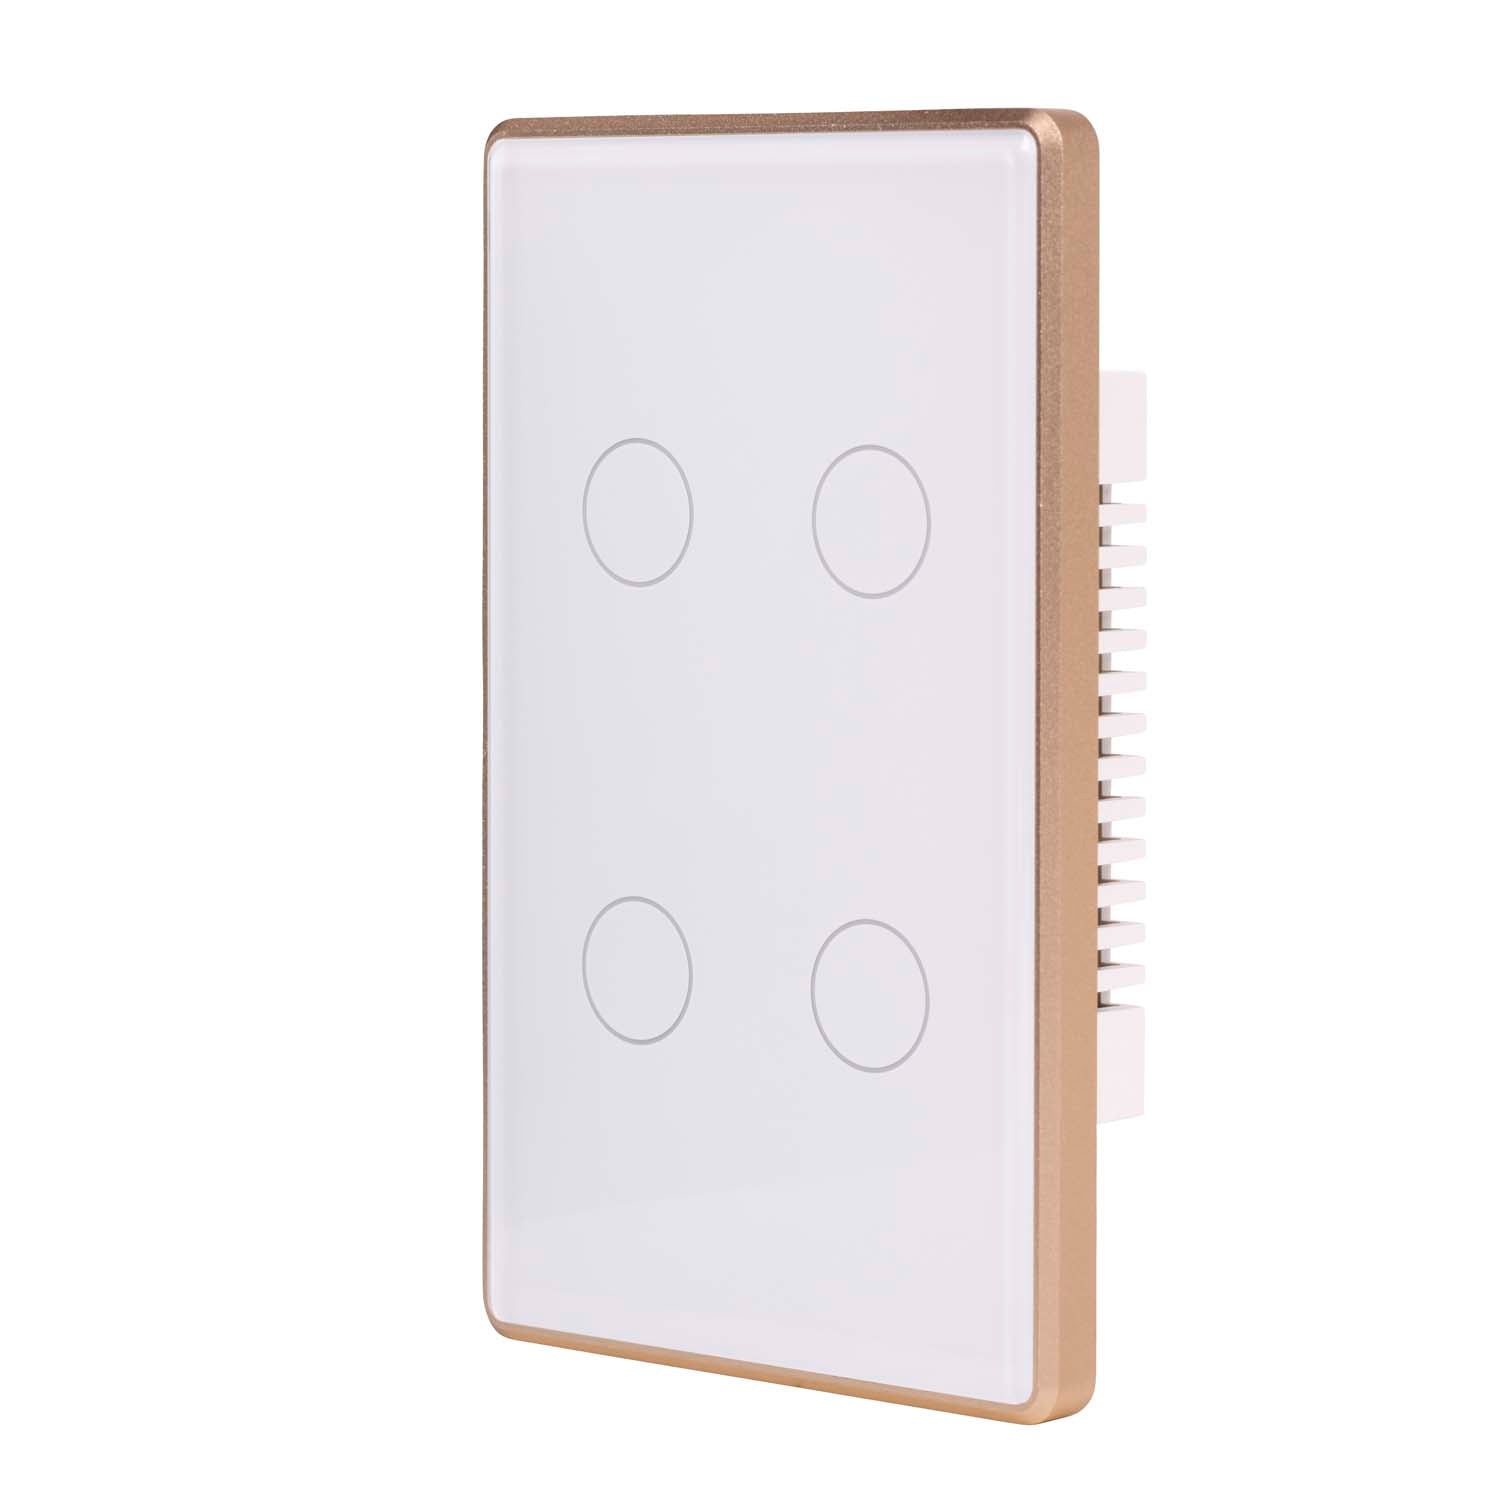 HV9120-4 - Wifi 4 Gang White with Gold Trim Wall Switch